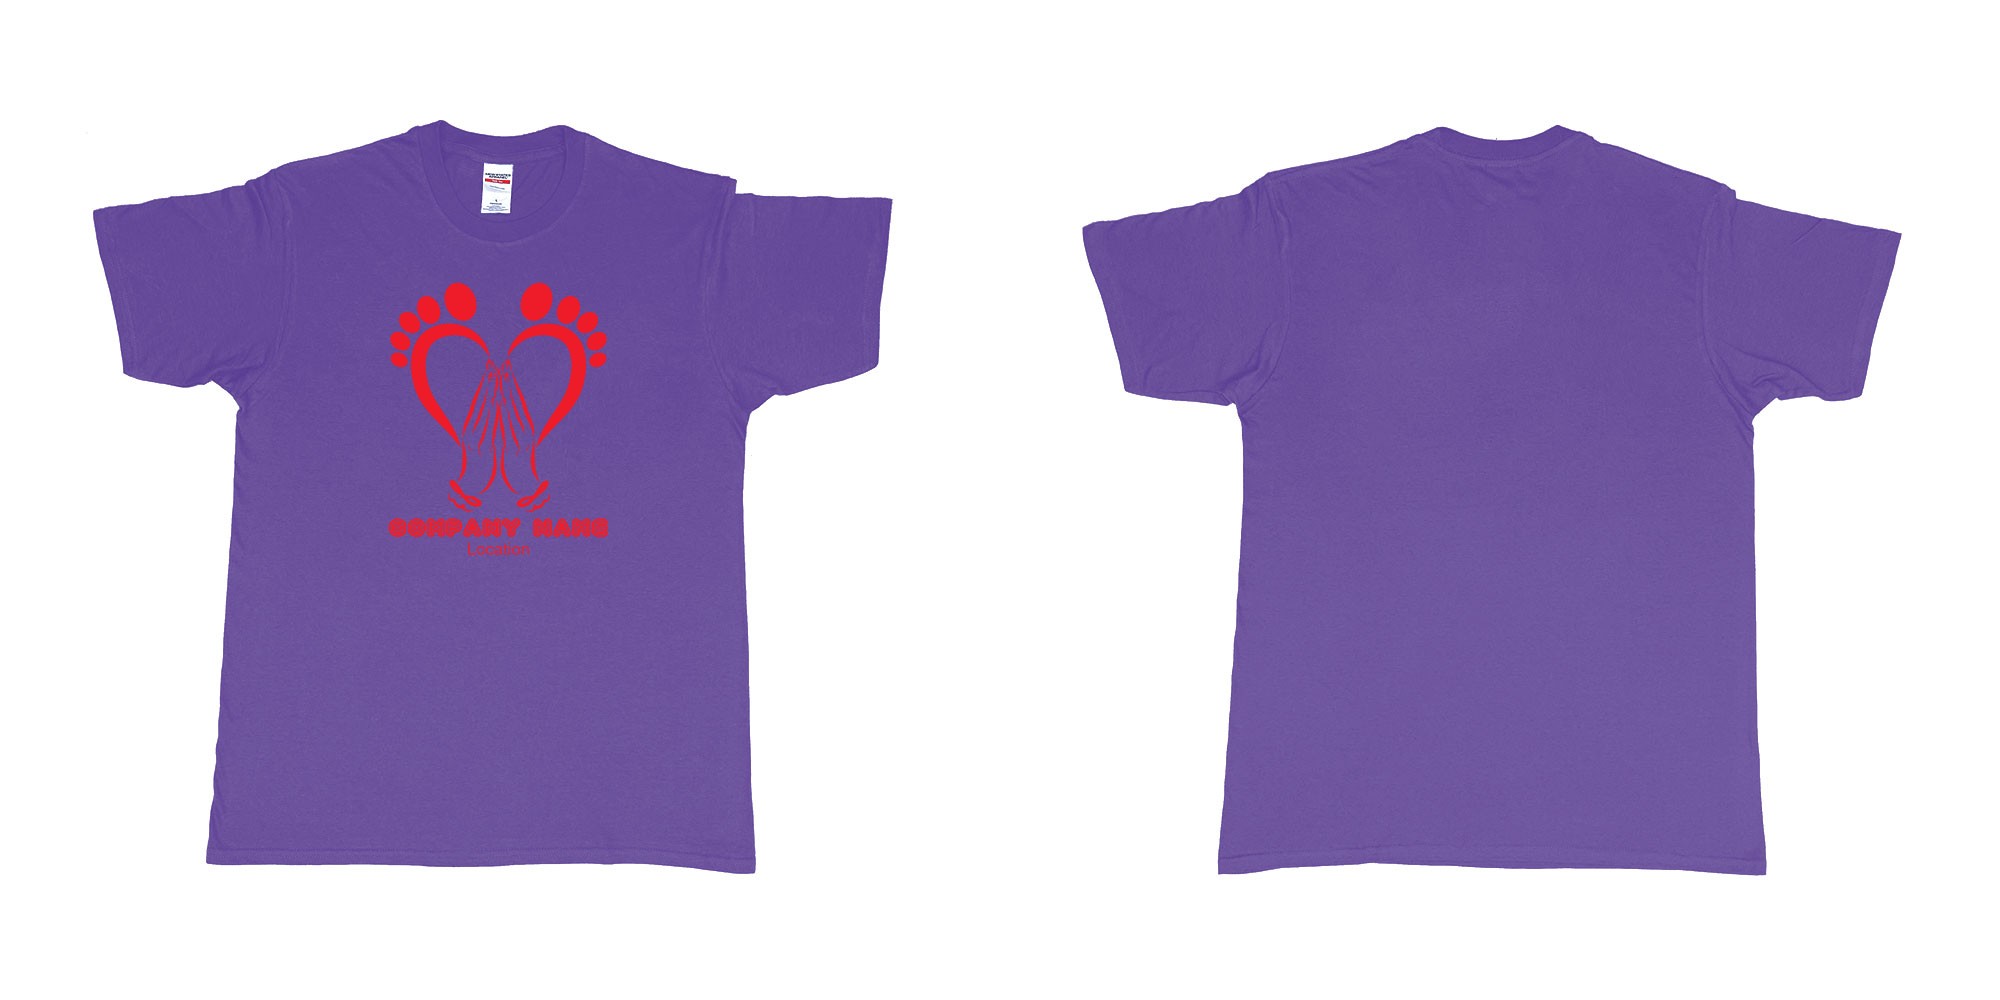 Custom tshirt design podiatrist chiropodist feet care specialist heart shaped feet with caring hands in fabric color purple choice your own text made in Bali by The Pirate Way